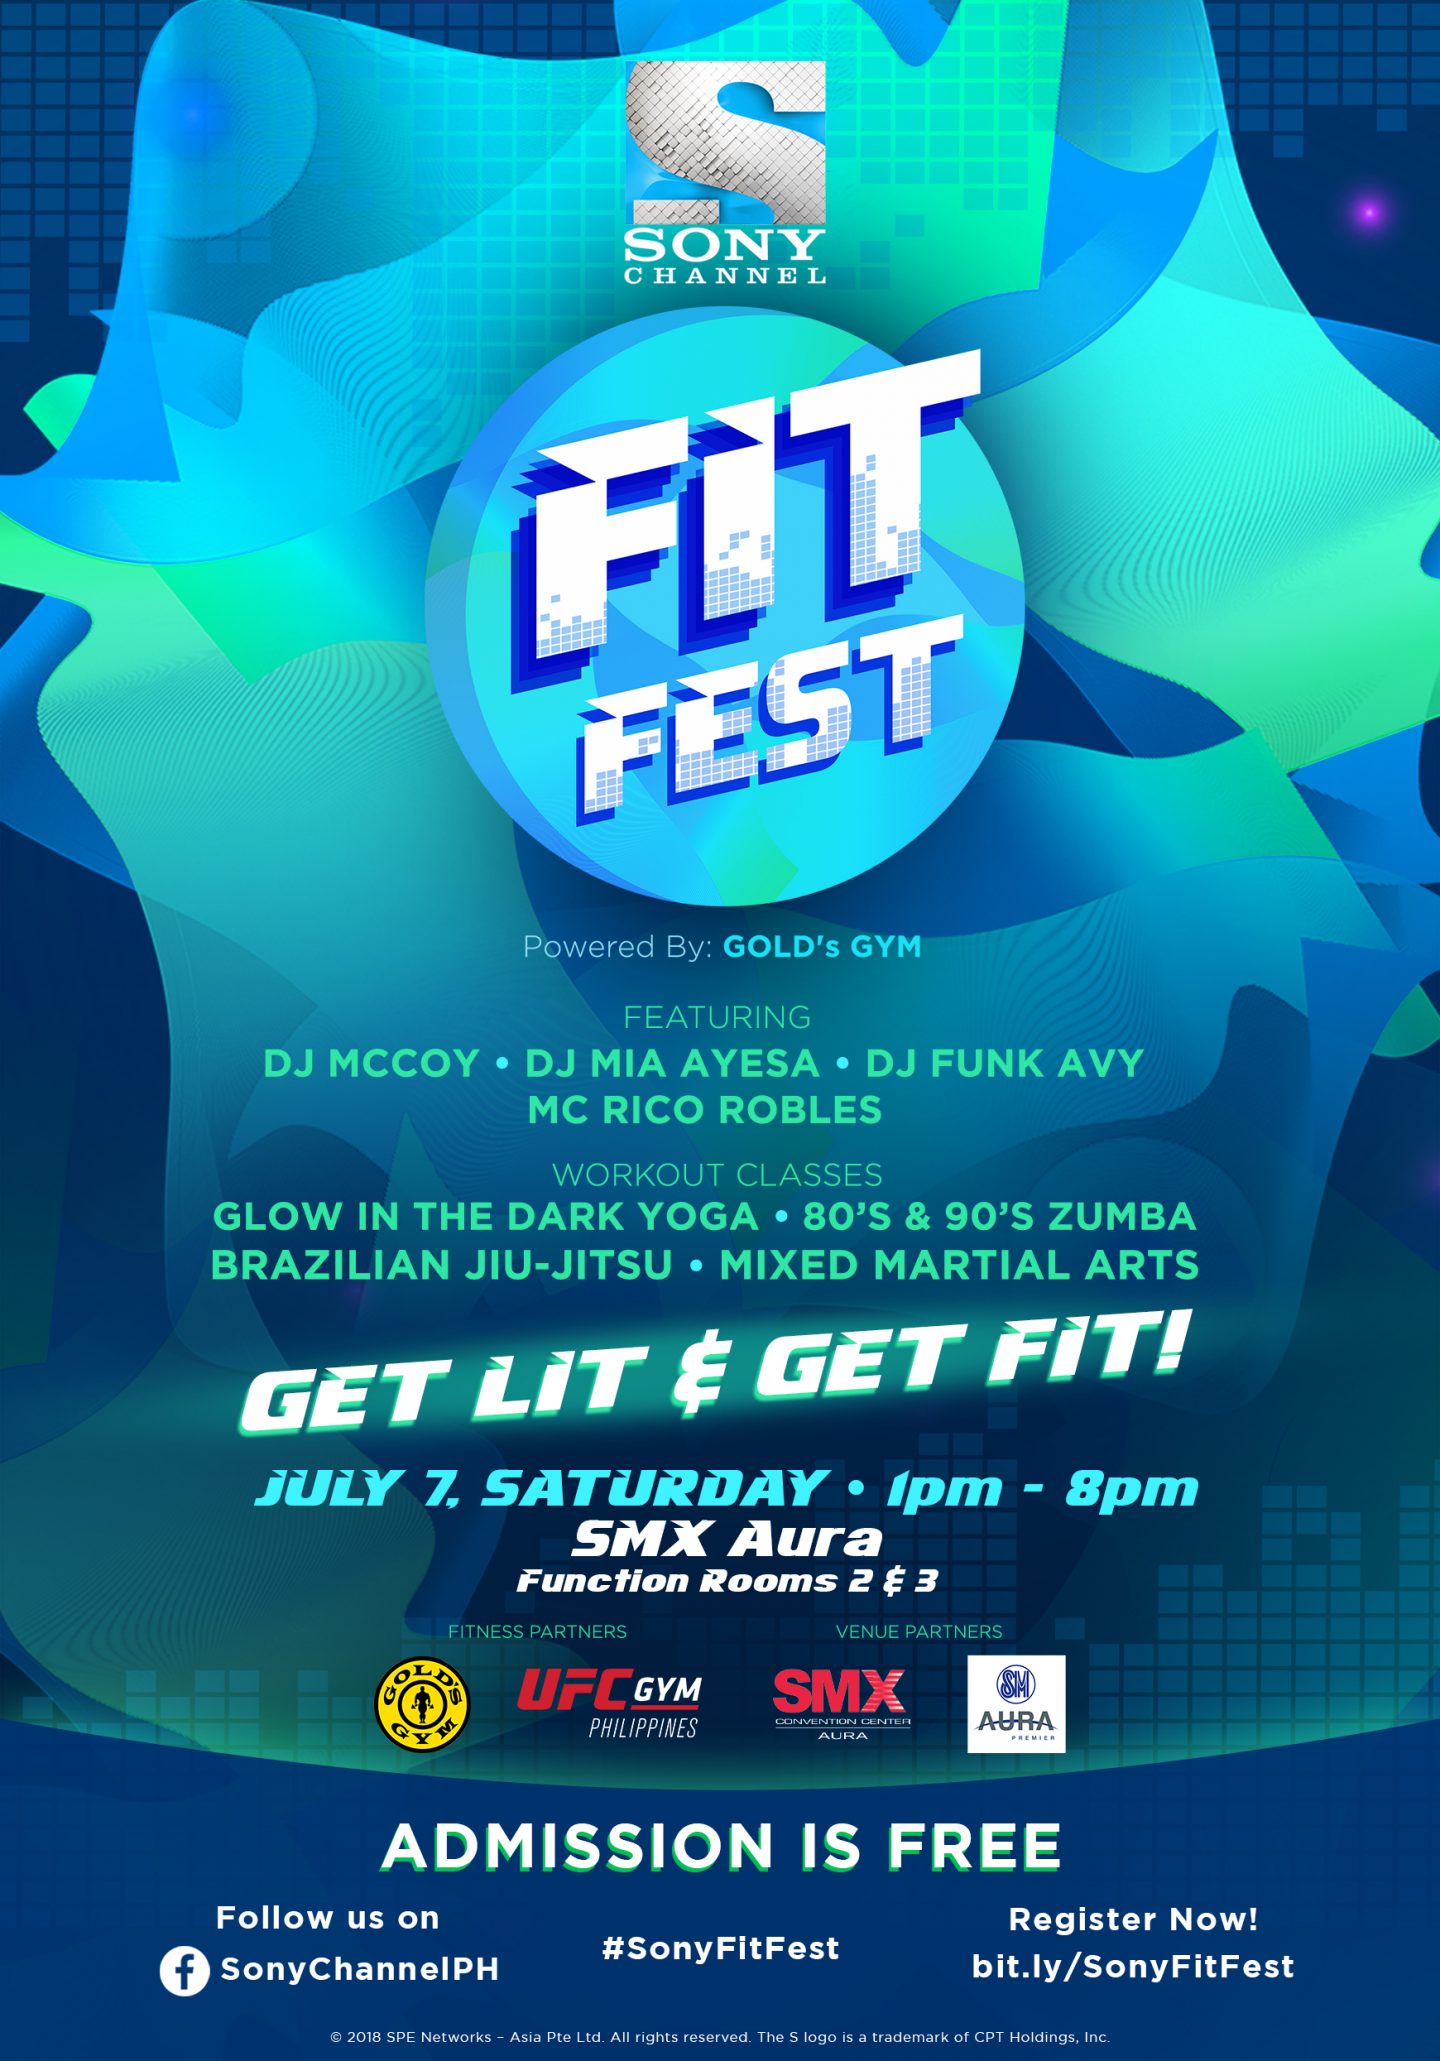 Sony Fit Fest 2018 at SMX Aura Pinoy Fitness